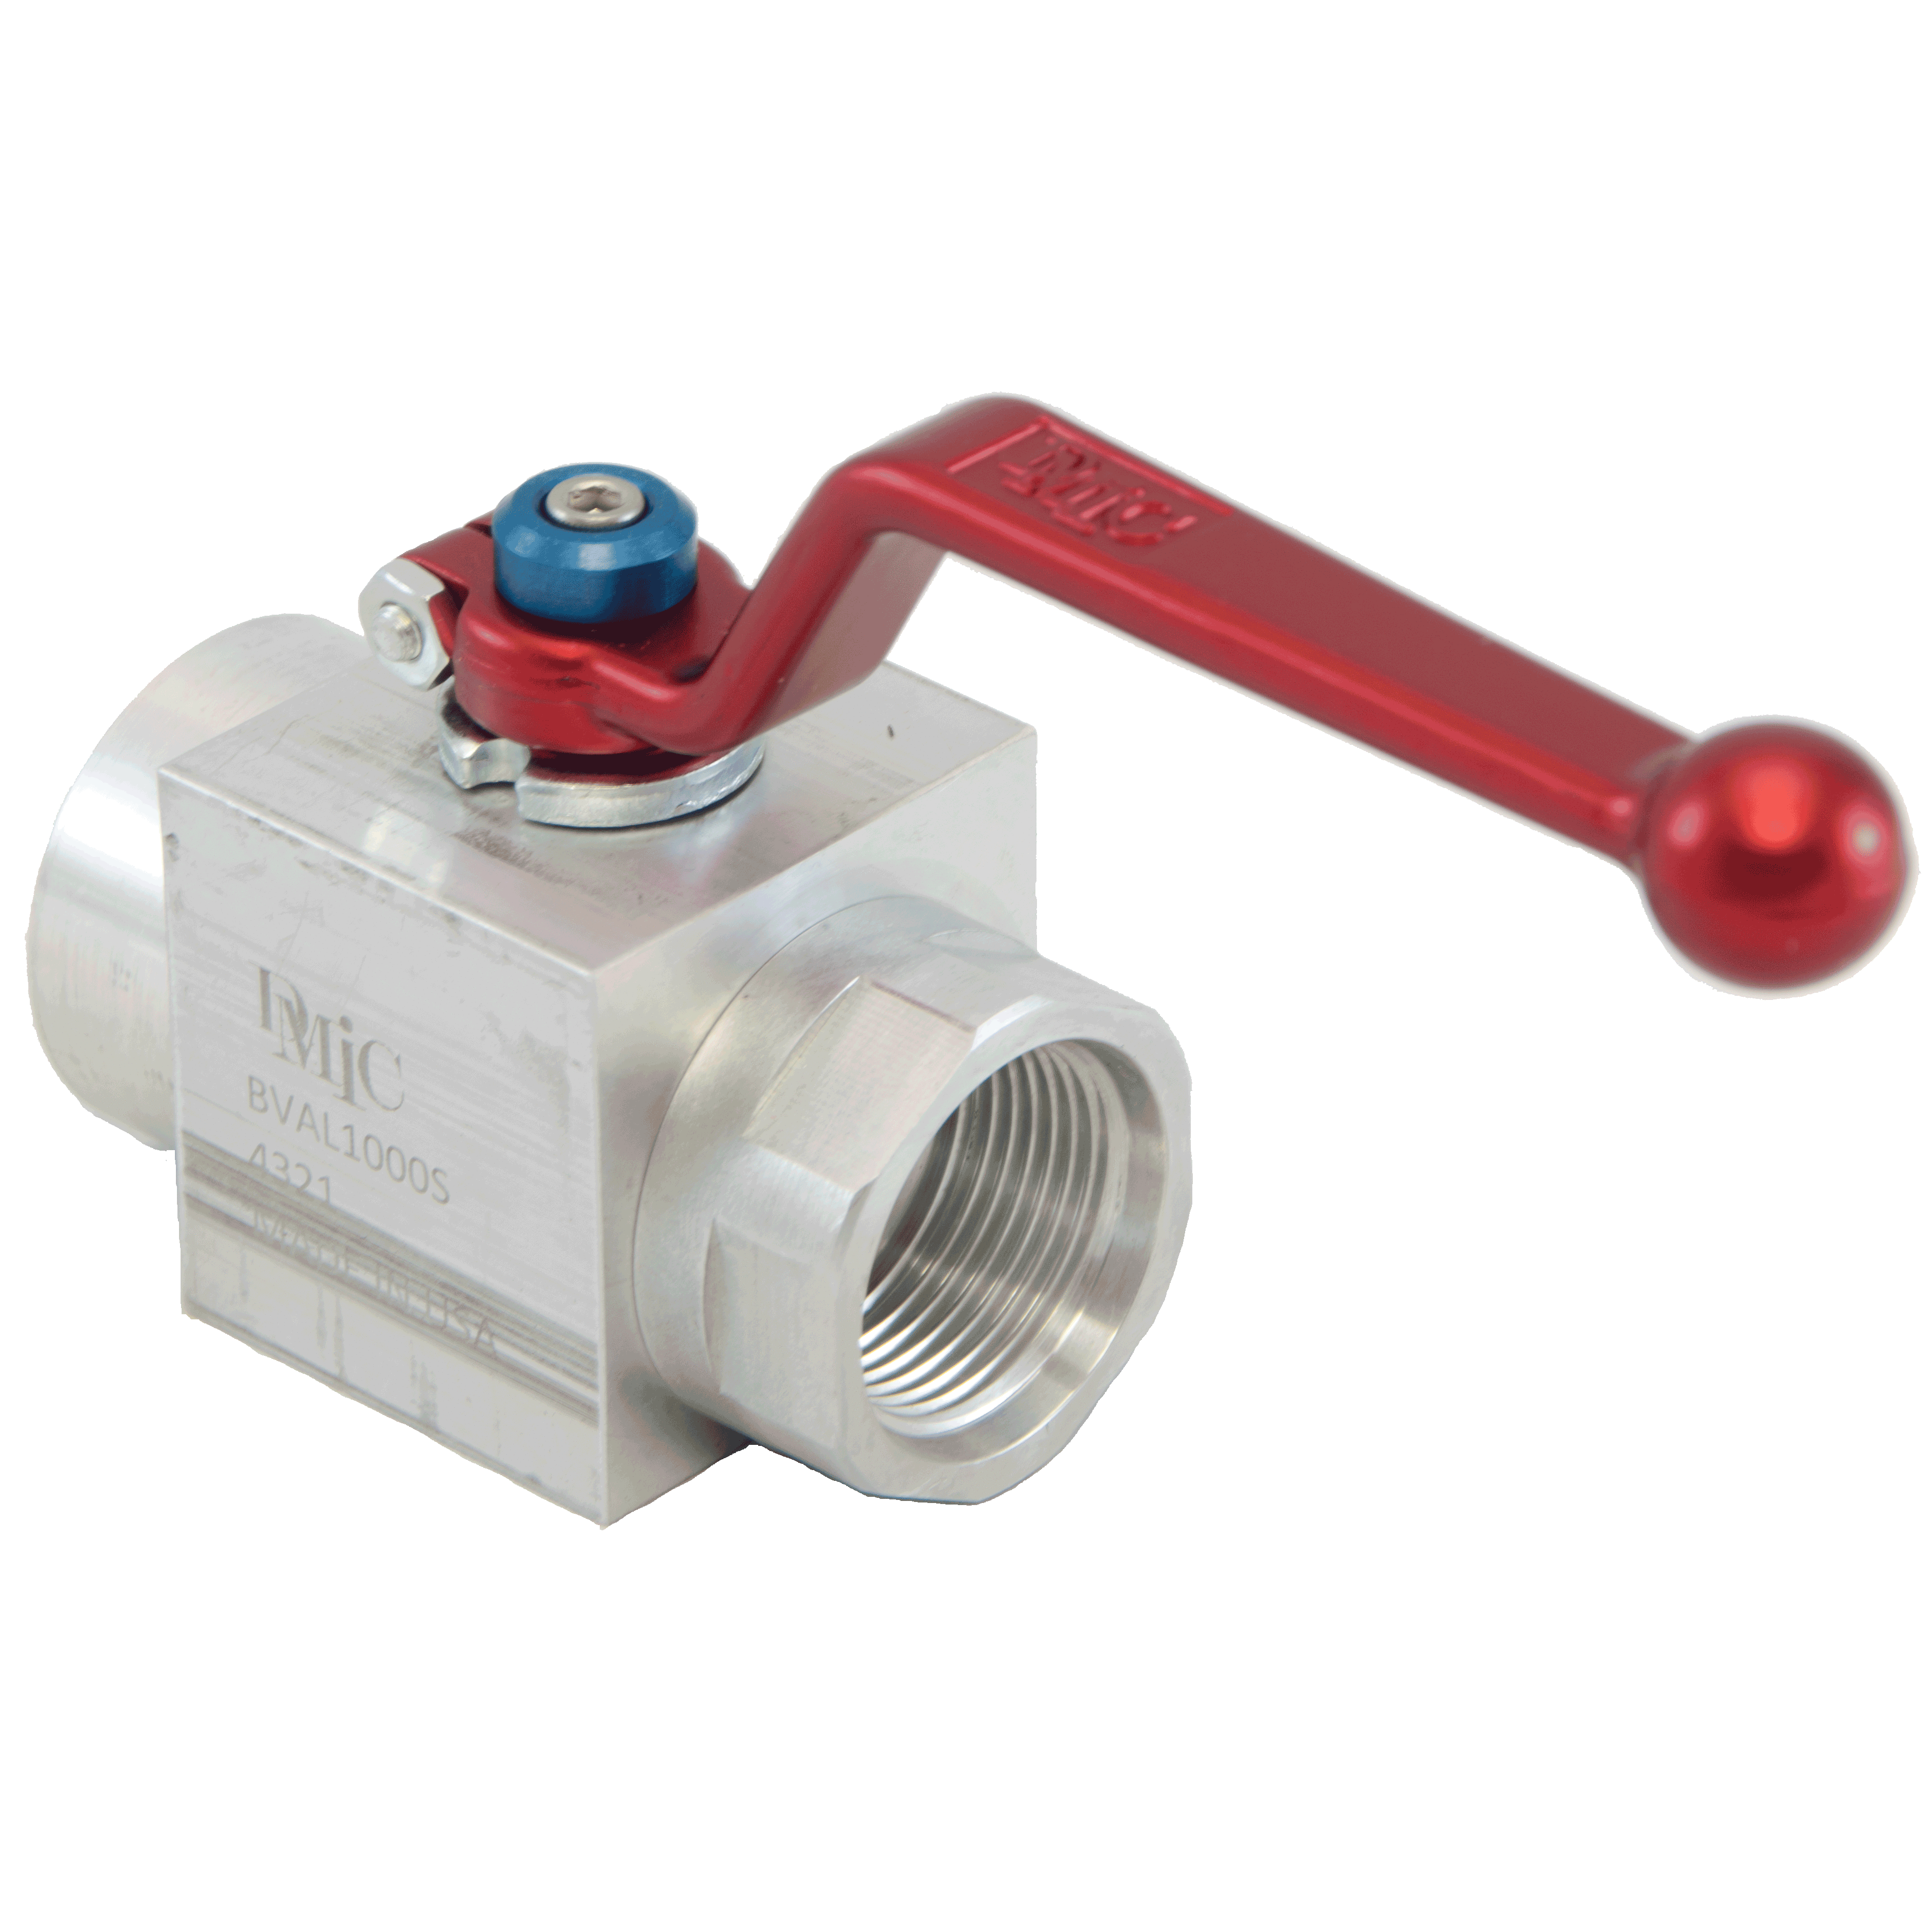 BVAL-2000N-4321 : DMIC Suction Ball Valve, 2 NPT, Aluminum, 600psi, Two-Way